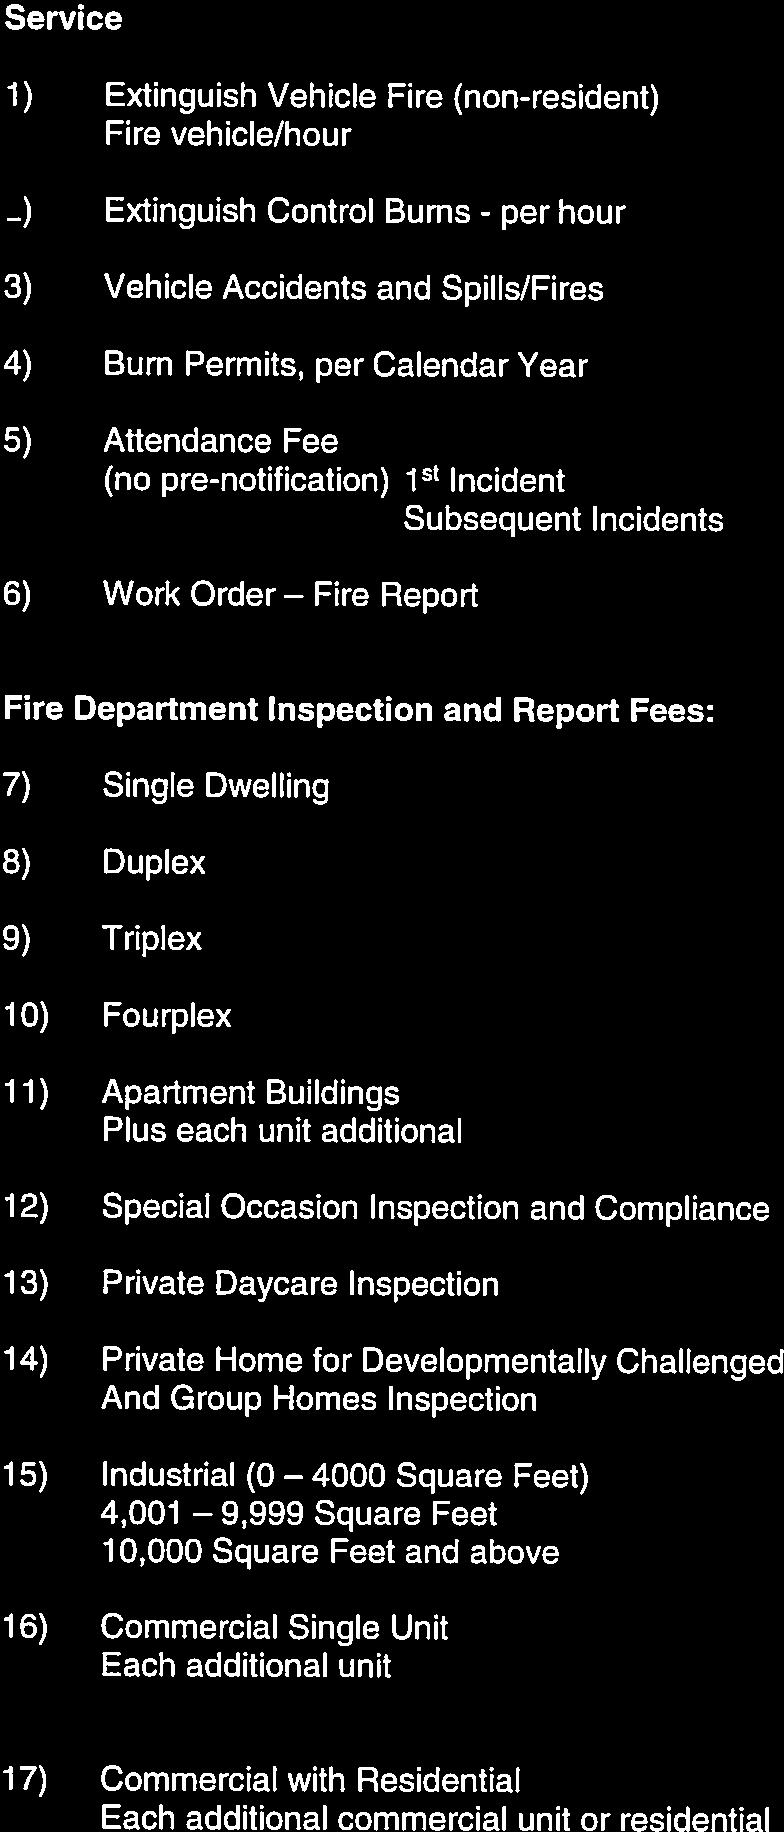 D To Corporation the Fire Department the Municipality Brighton Service 1) Extinguish Vehicle Fire (non-resident) Fire vehicle/hour Current MTO Rates 2) Extinguish Control Bums - per hour Current MTO